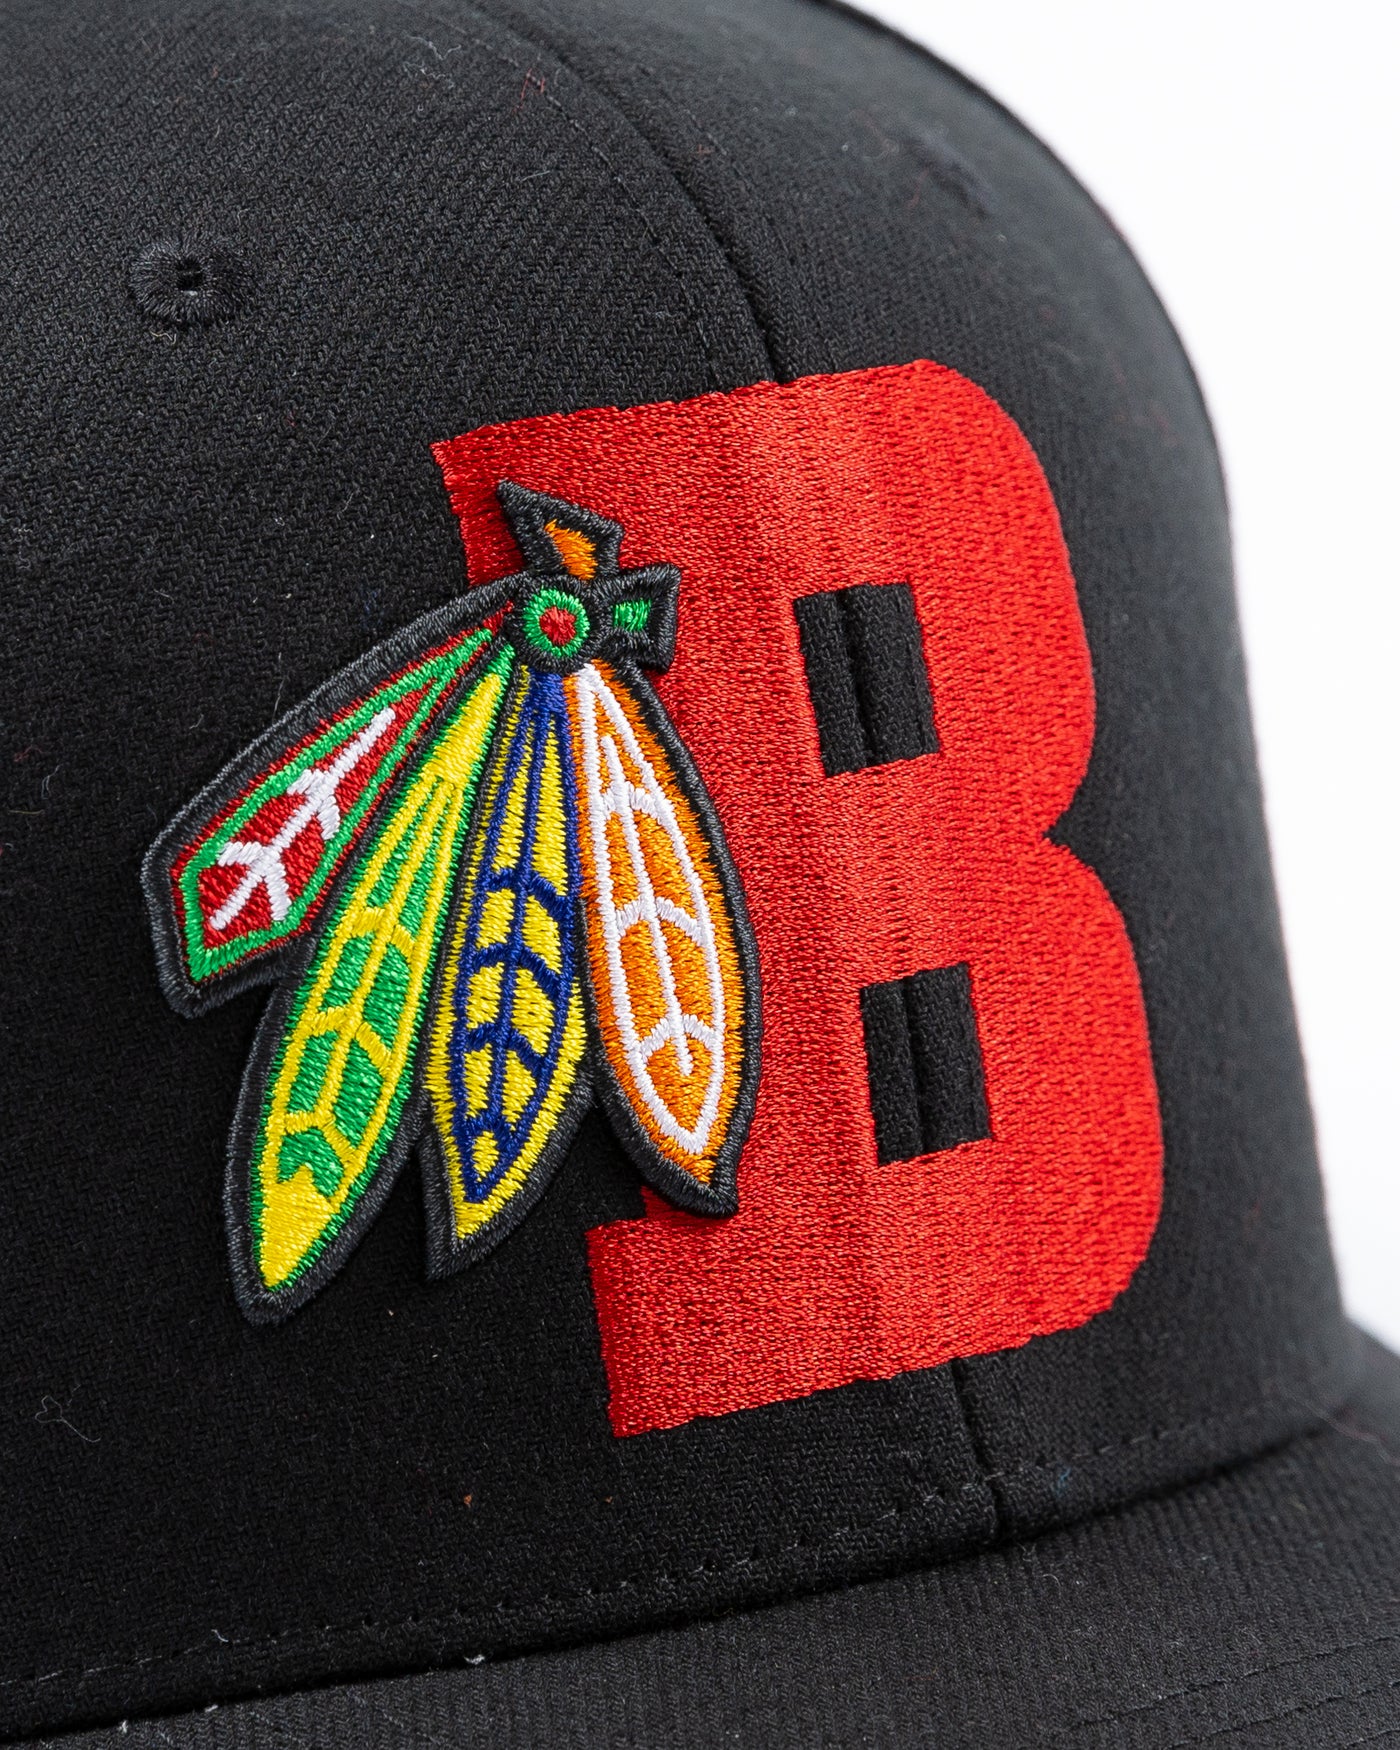 black Mitchell & Ness snapback with Chicago Blackhawks four feathers logo embroidered on red letter B - detail lay flat